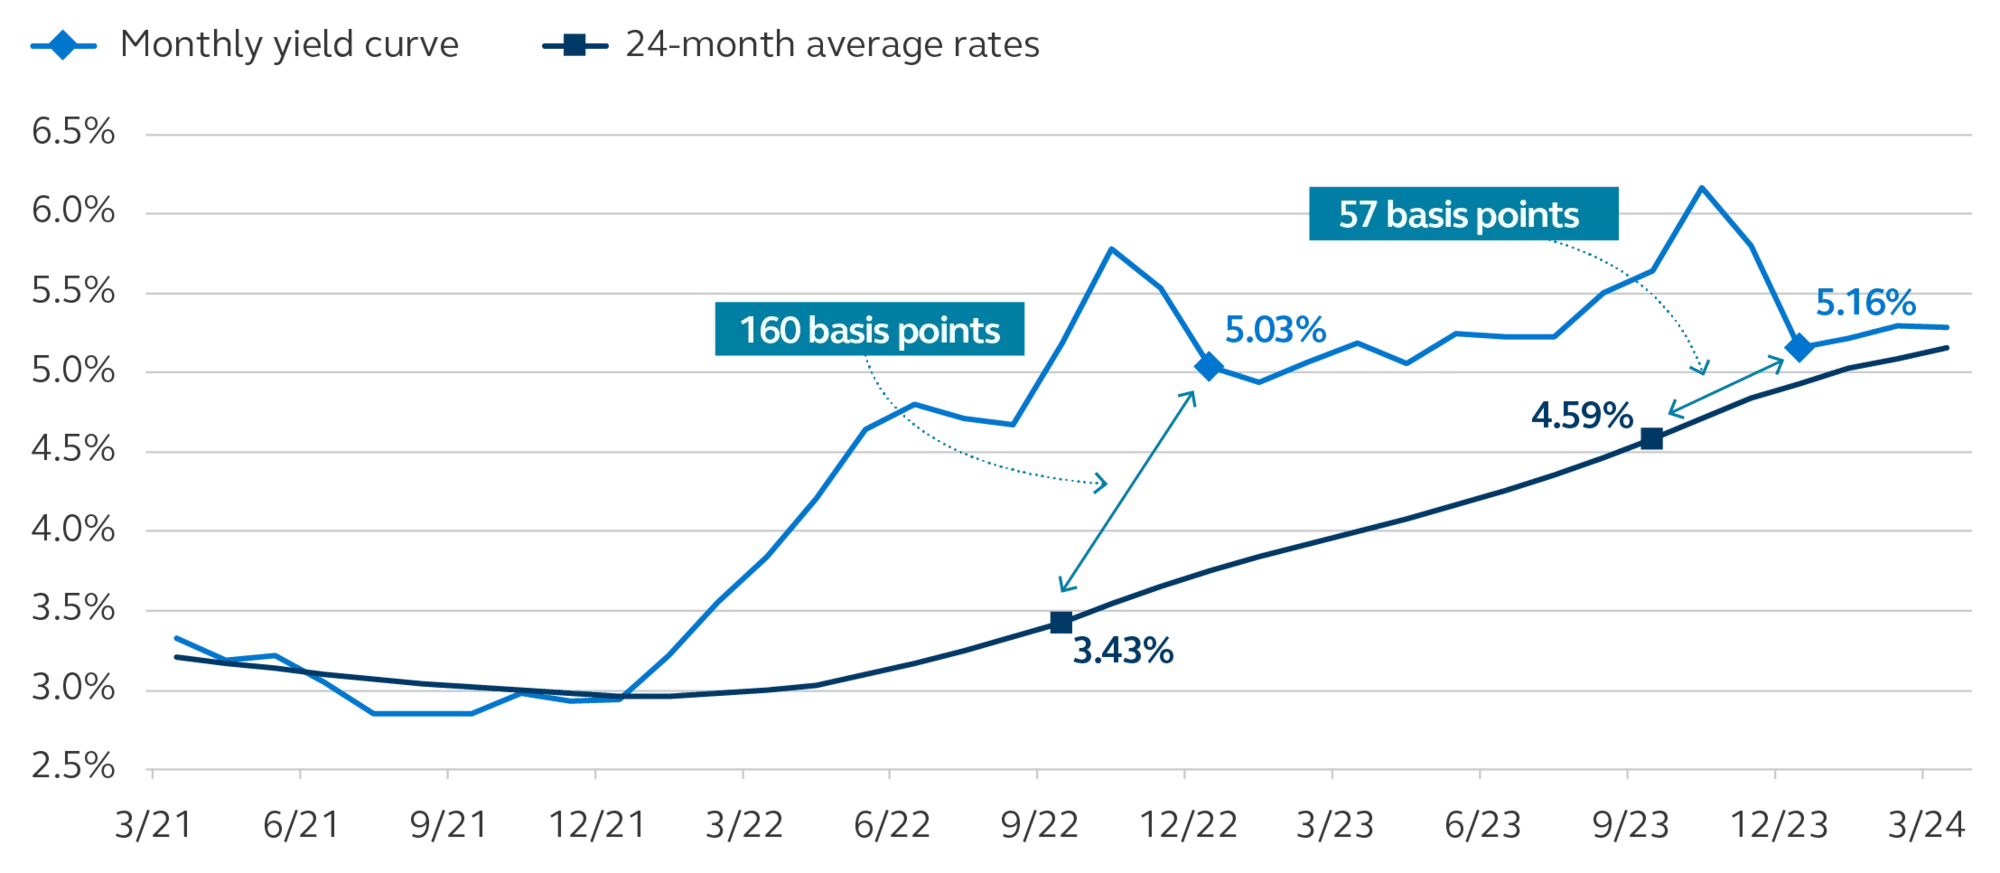 Potential gaps between the 24-month average rates and the monthly yield curve average and highlights where savings can be found.